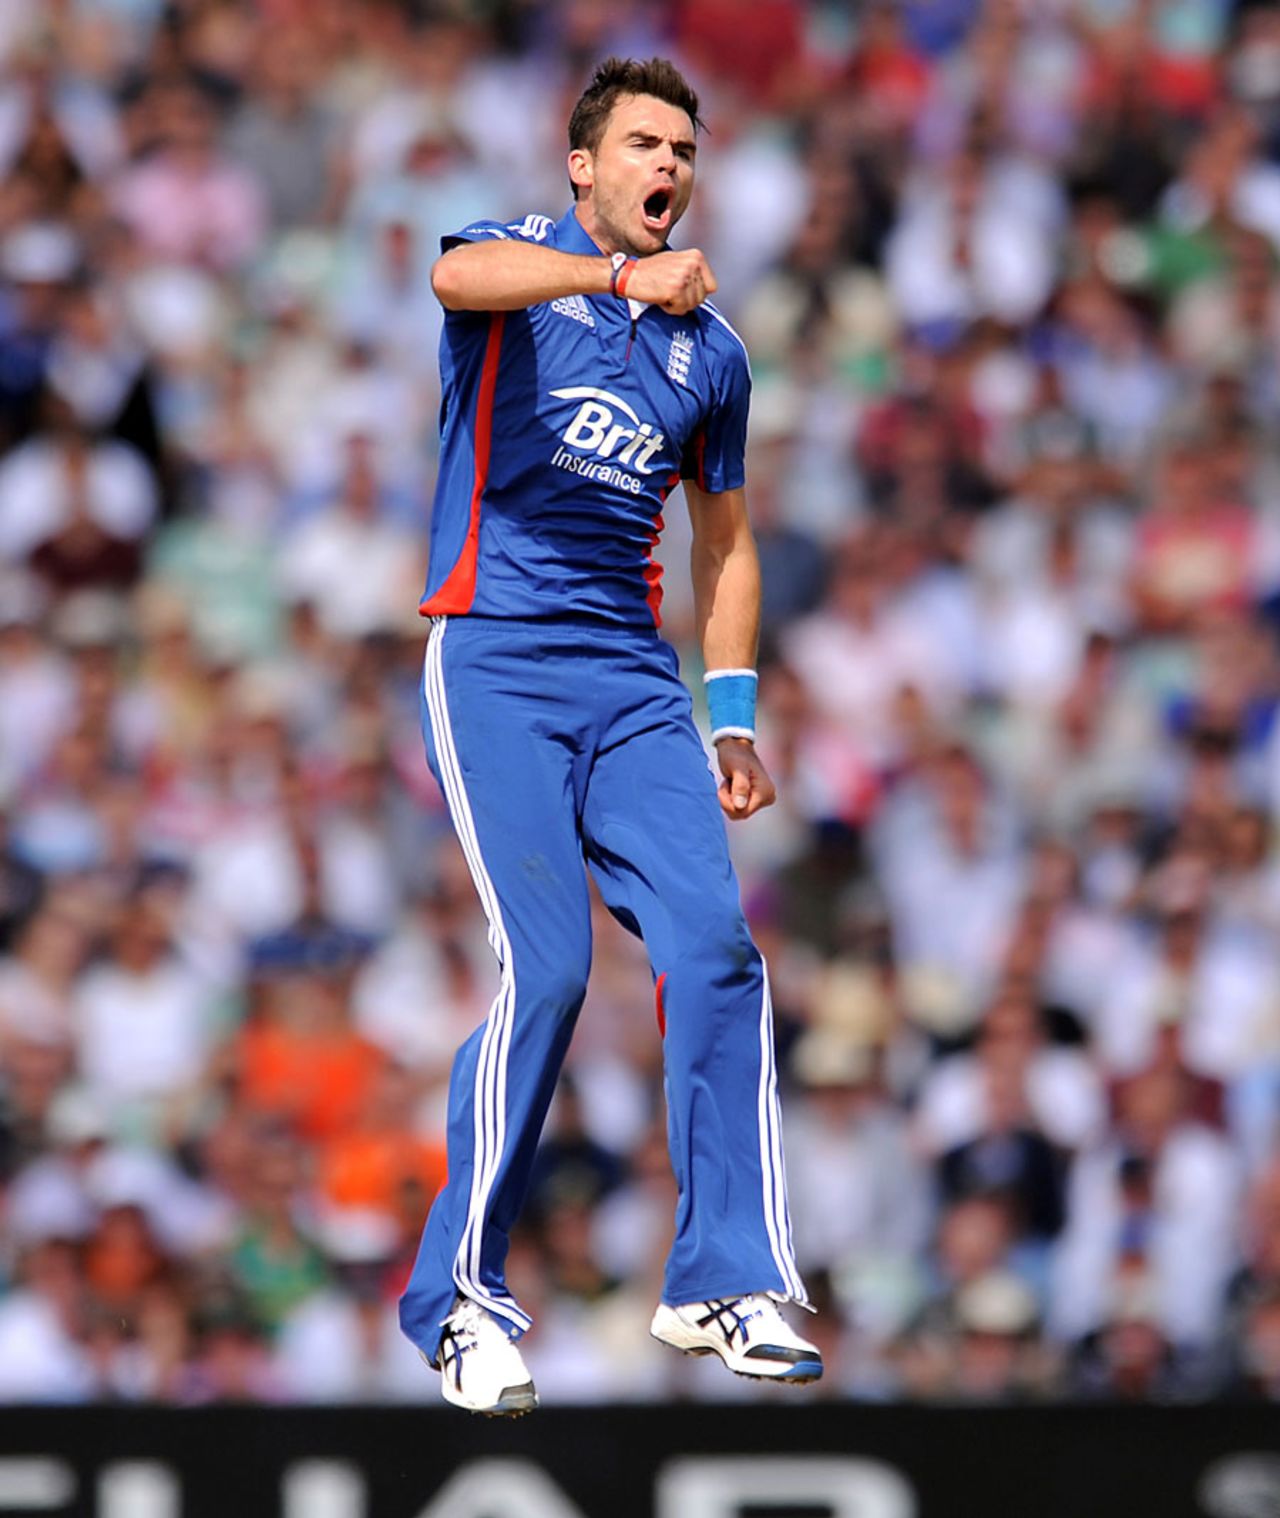 James Anderson broke the opening stand, England v South Africa, 3rd NatWest ODI, The Oval, August 31, 2012